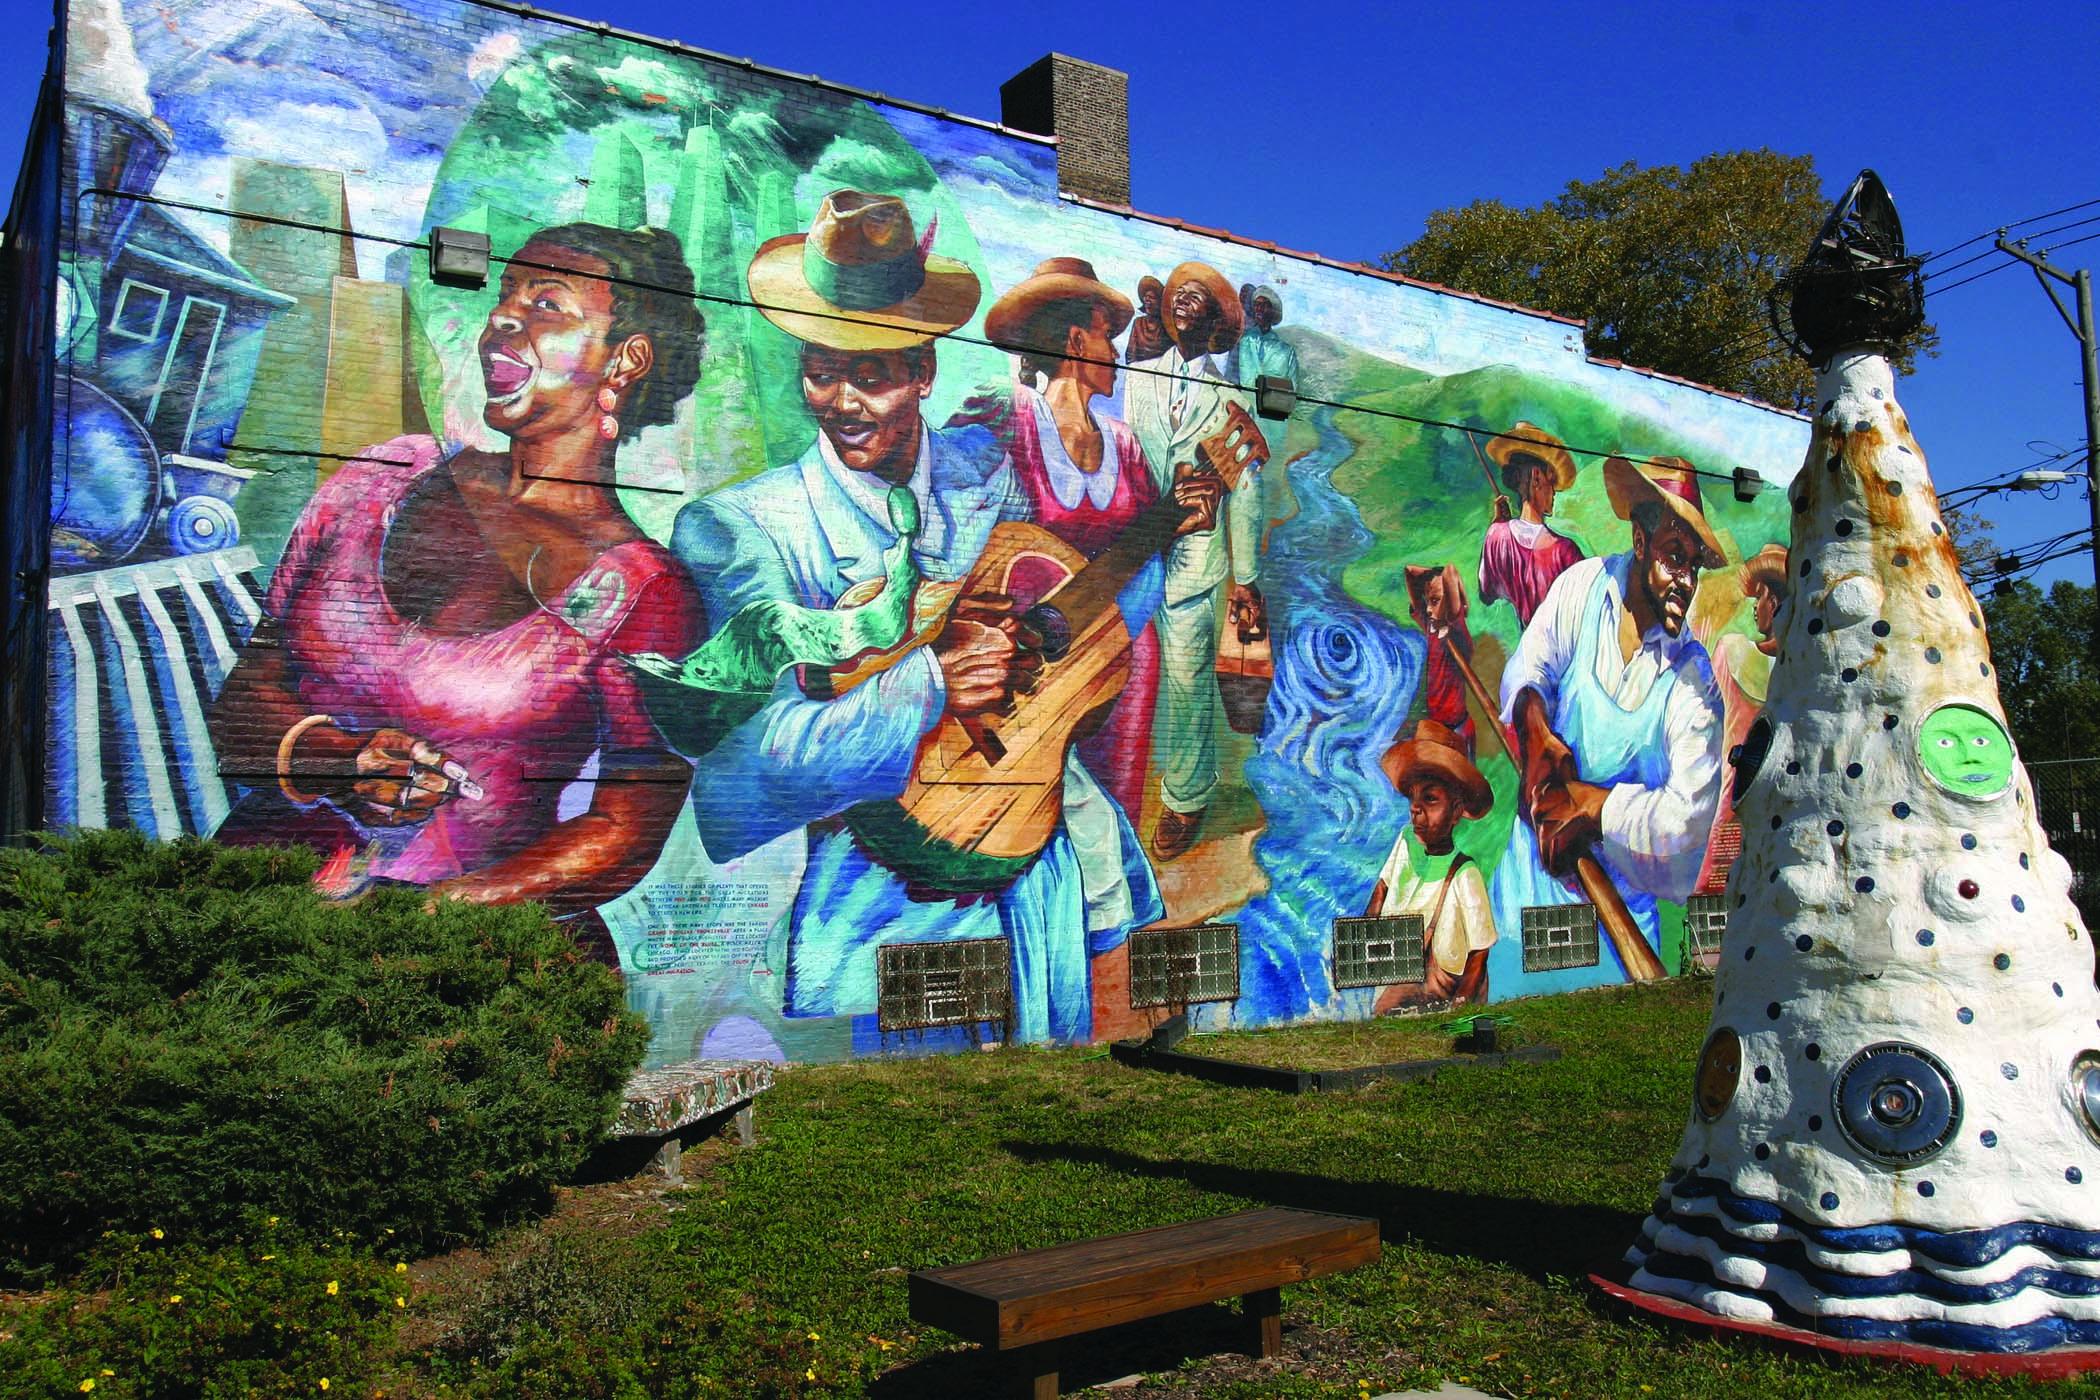 The 50x50 Neighborhood Arts Project aims to bring more public art to all of Chicago's neighborhoods, including murals like this one in Bronzeville. (Courtesy of the City of Chicago)